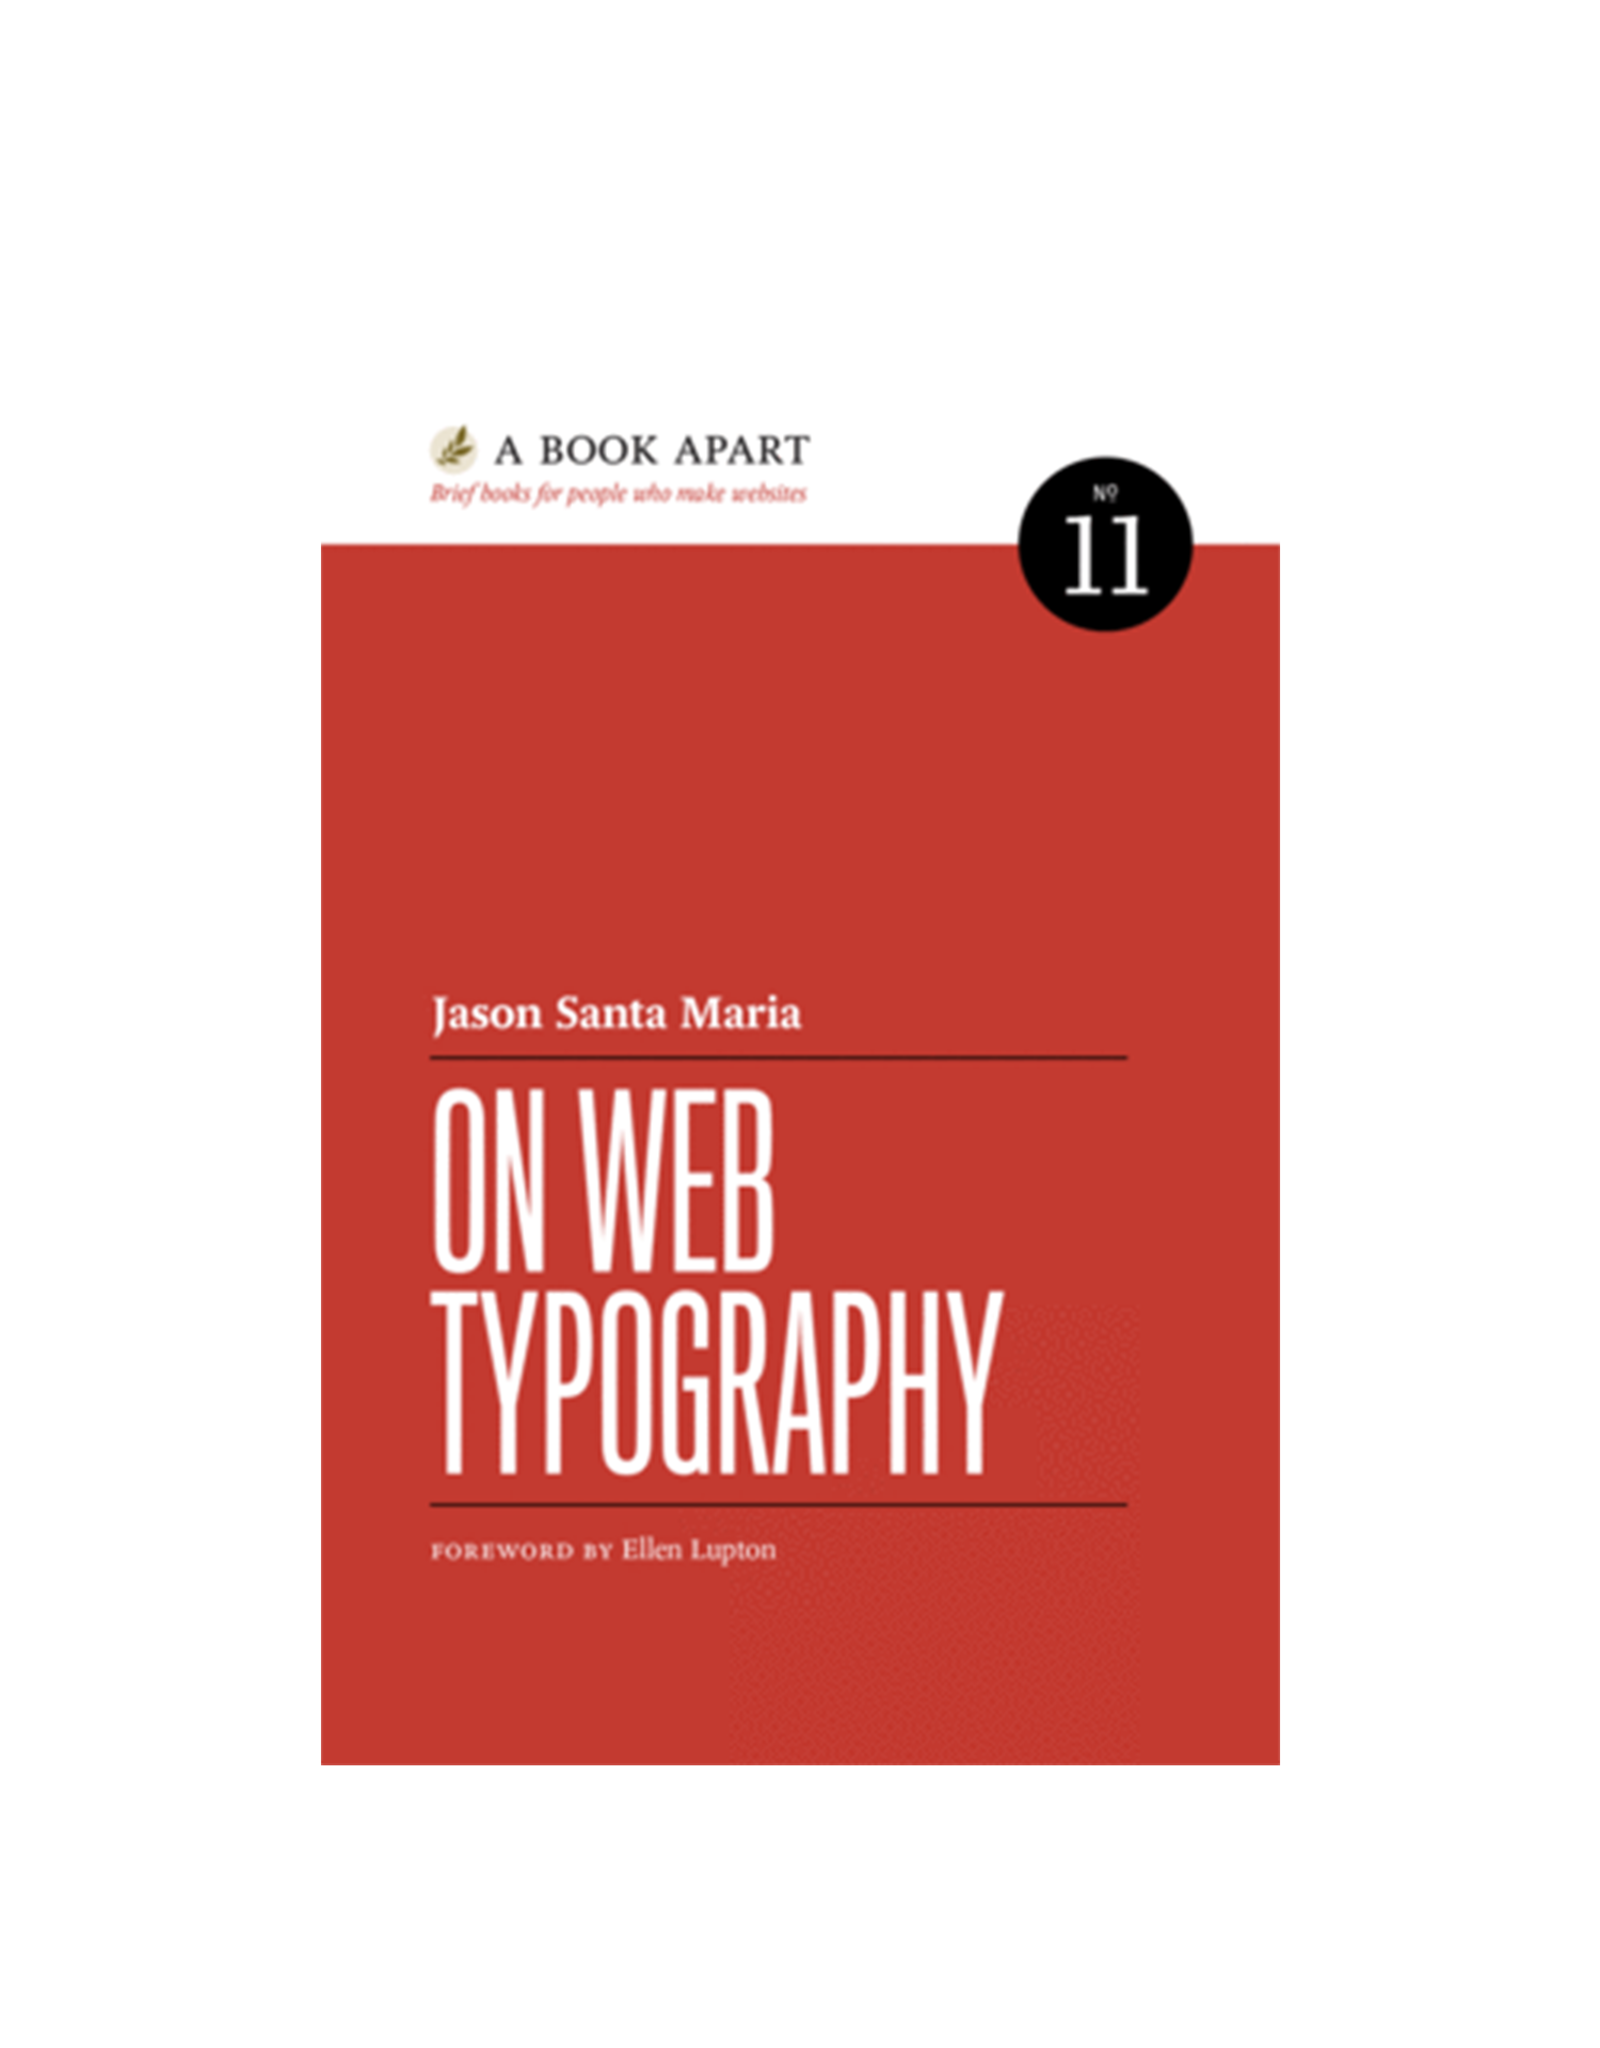 A Book Apart: On Web Typography (No. 11)